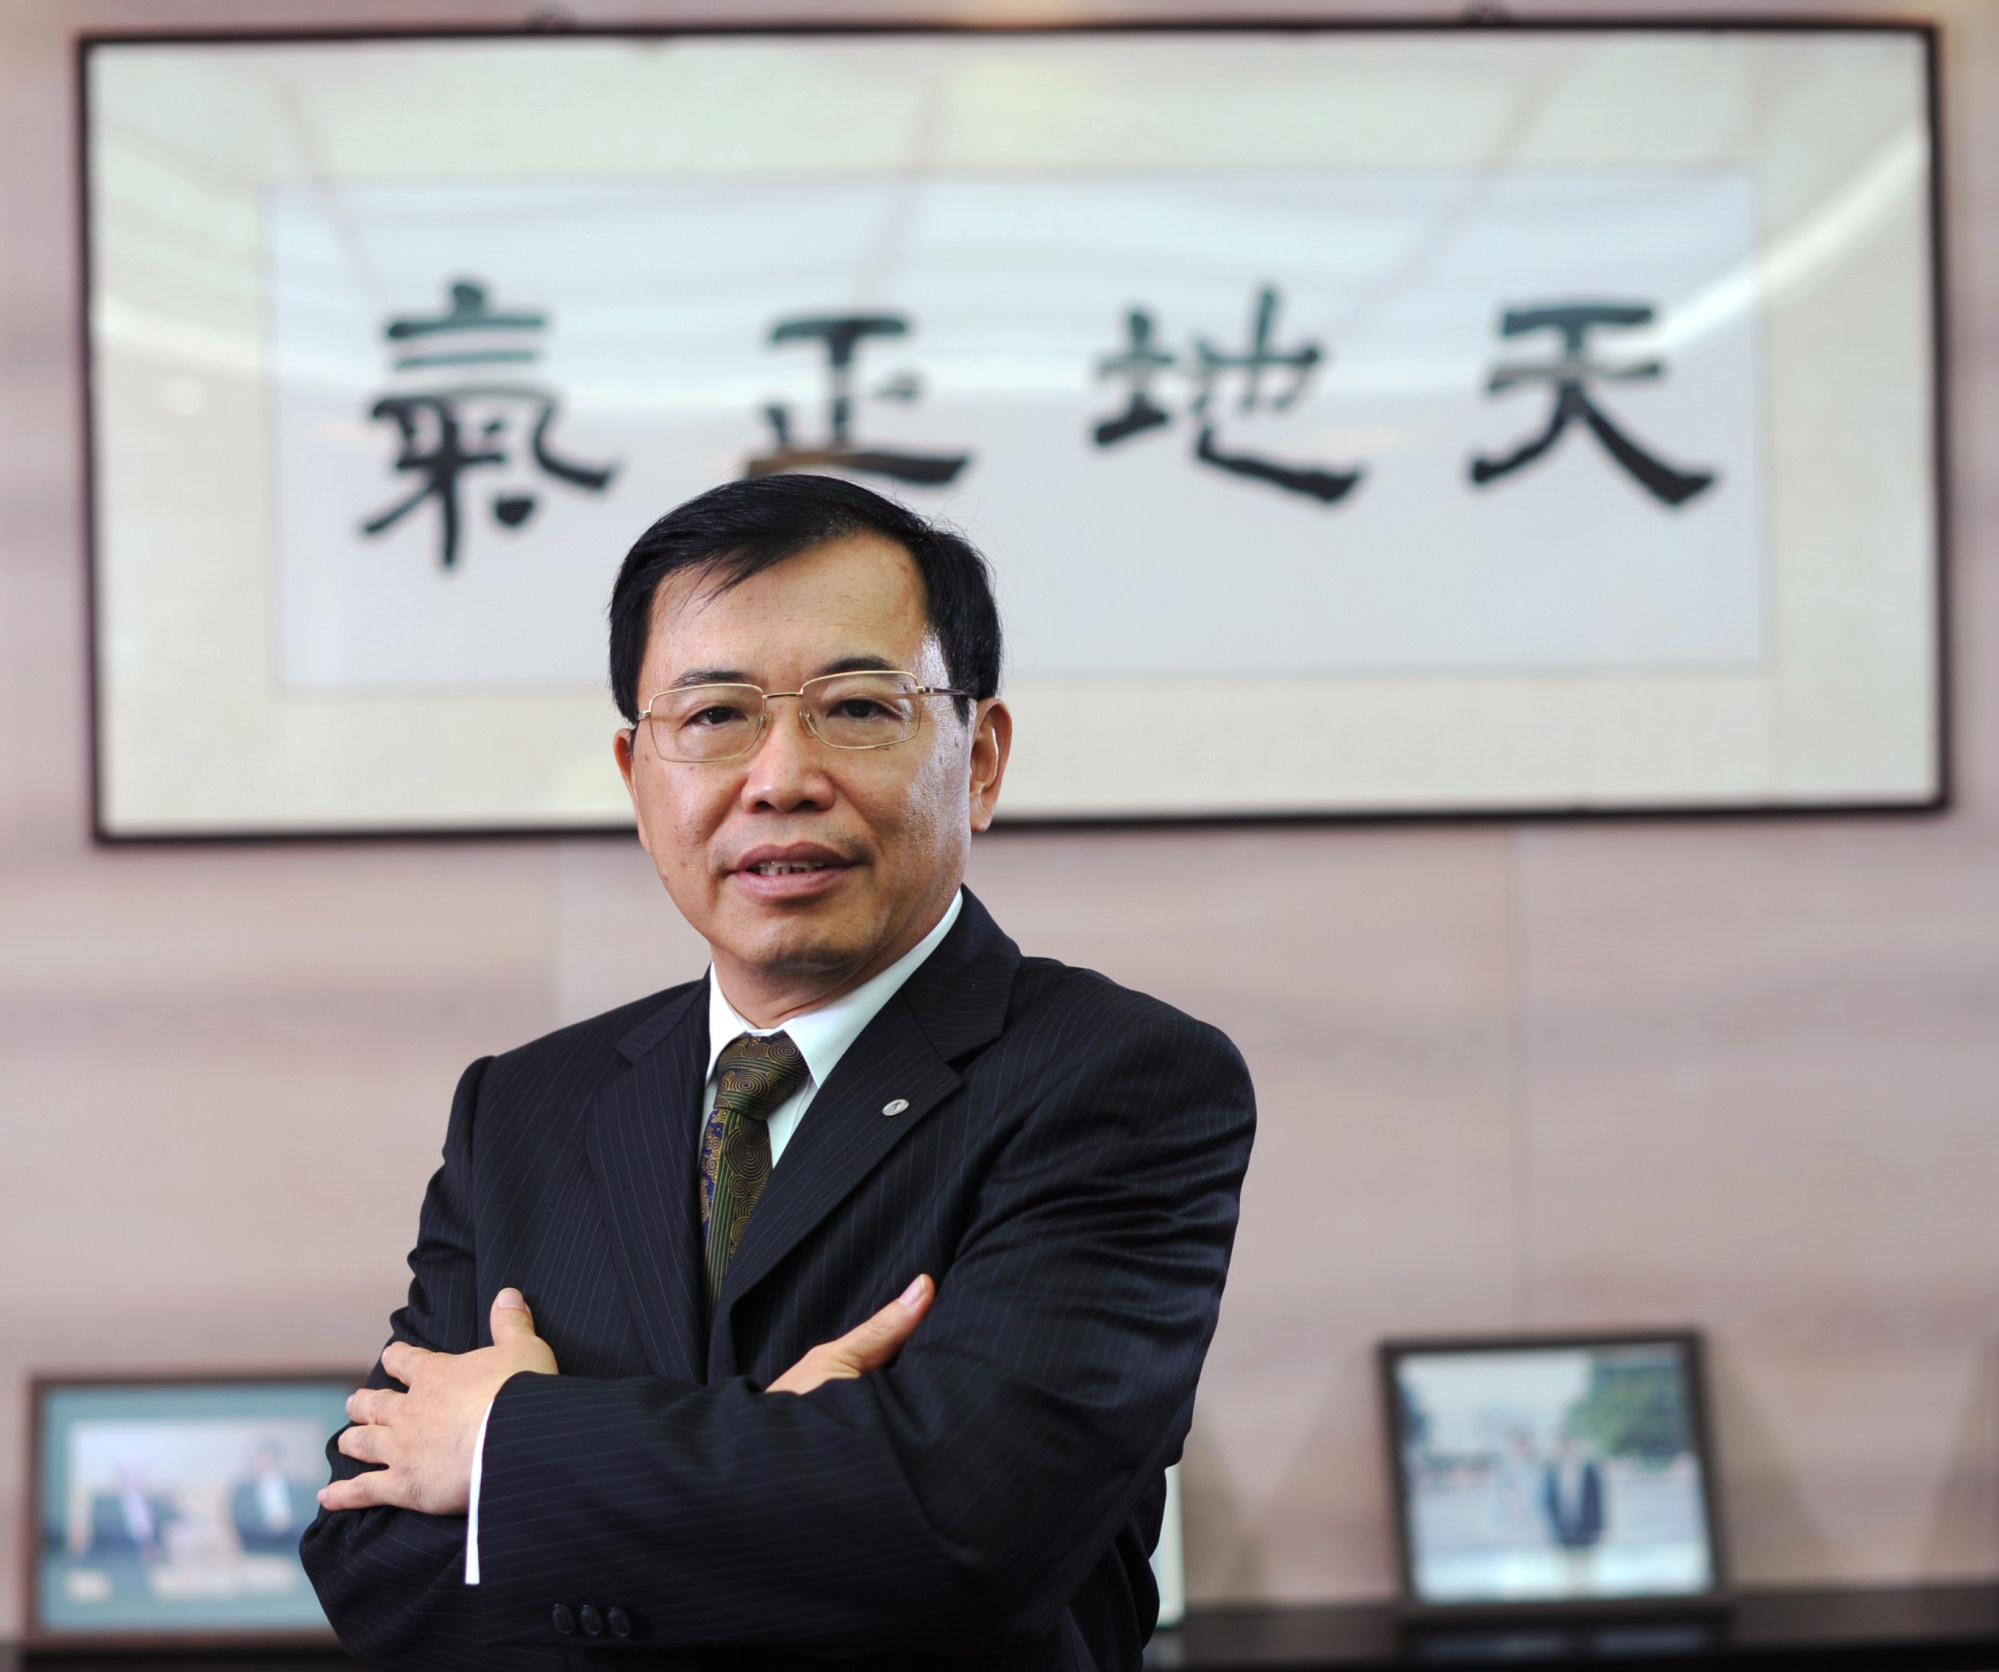 Li Dongsheng, chairman of TCL and a deputy to the National People’s Congress. Photo: SCMPOST